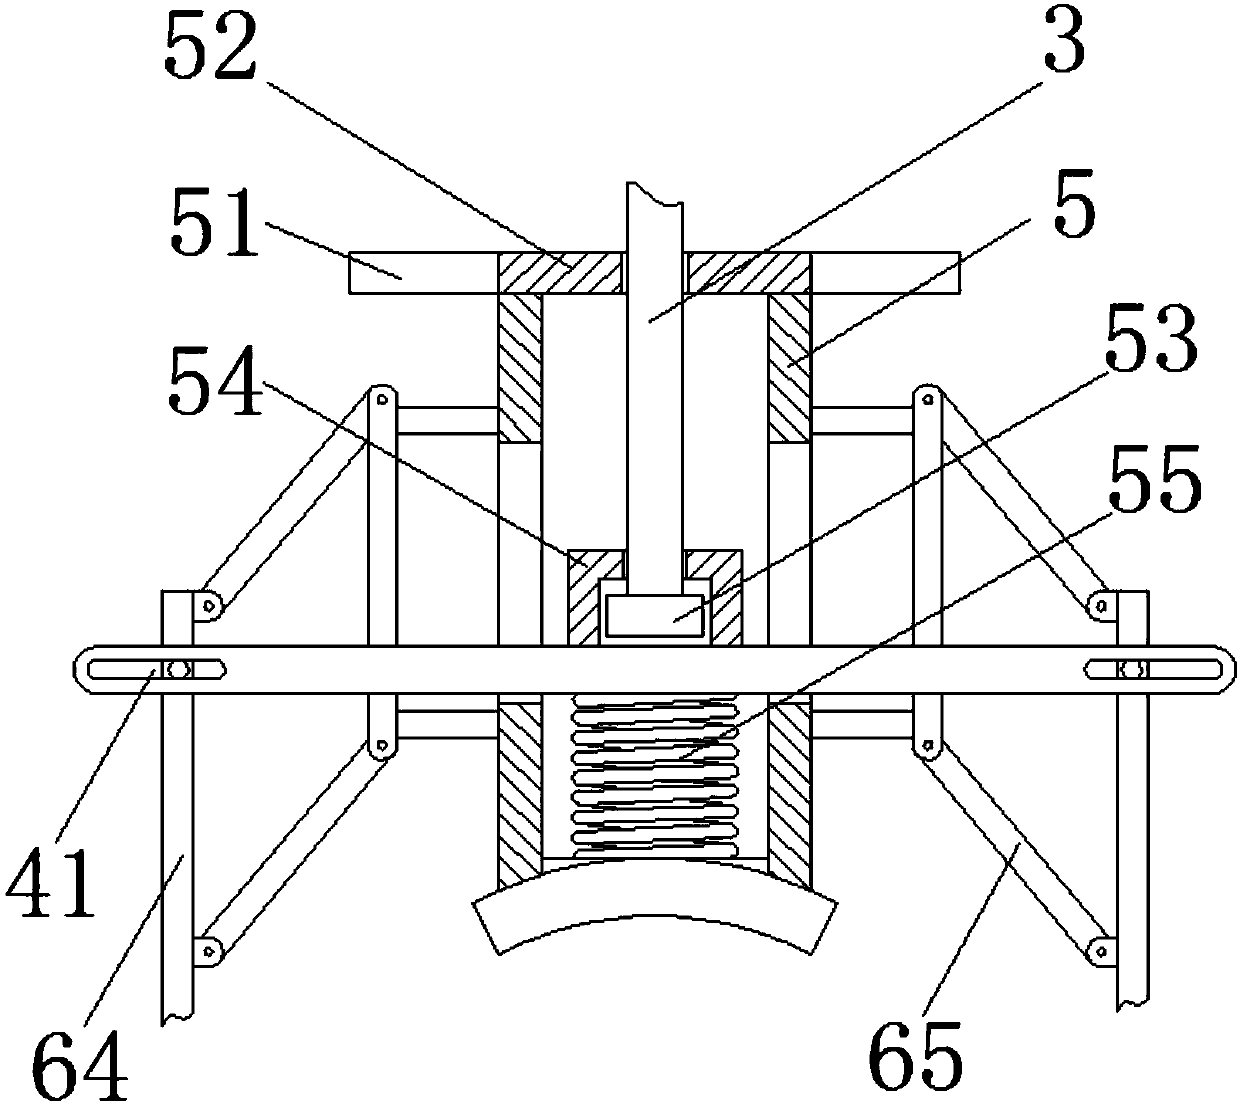 Device for clamping insulator